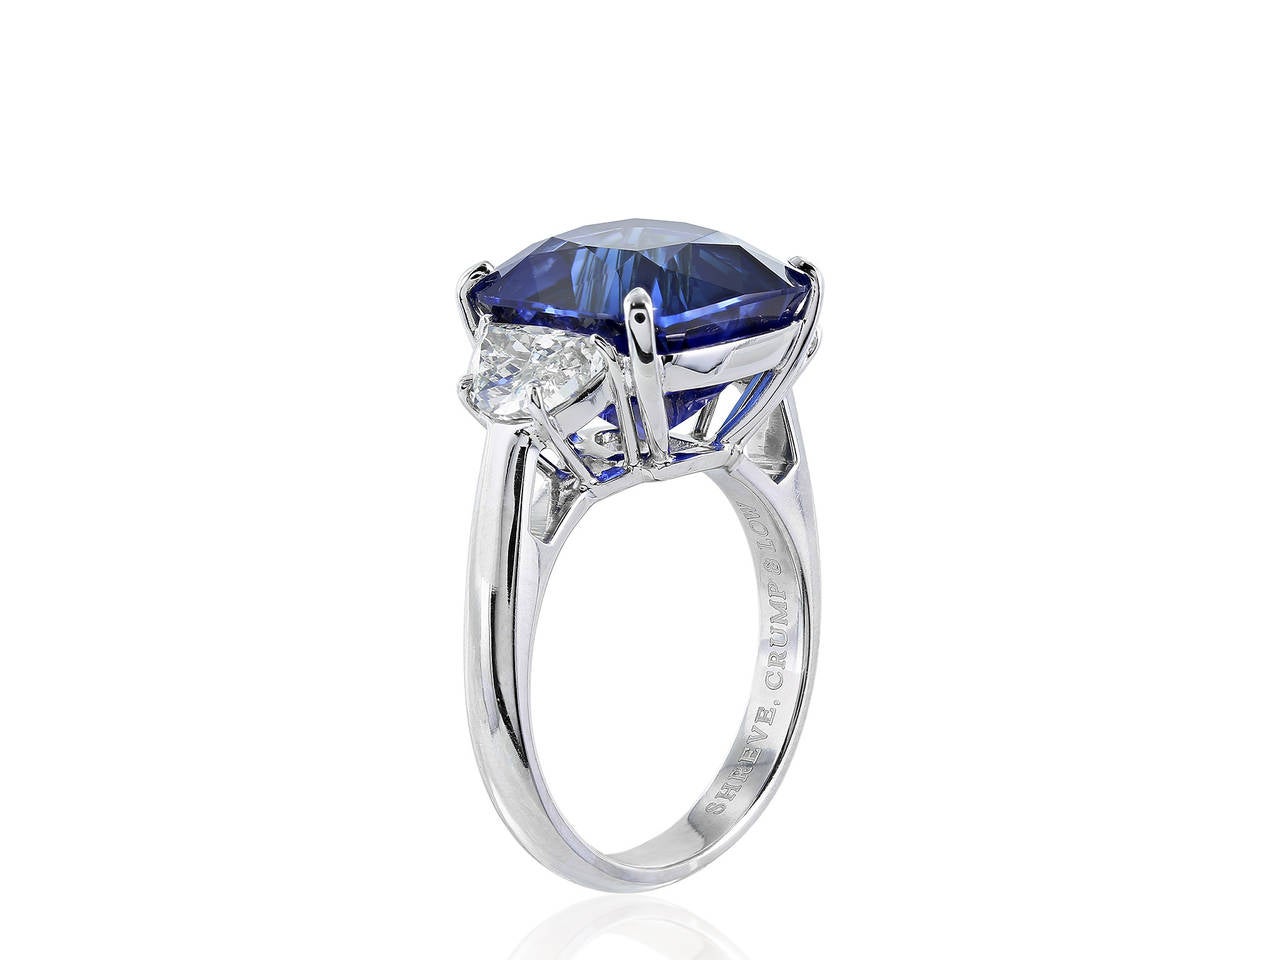 Platinum custom made three stone ring consisting of 1 cushion cut deep blue sapphire weighing 11.14 carats, measuring around 12.45 x 11.70 x 9.00 mm and flanked by 2 half moon cut diamonds having a total weight of 1.32 carats and an approximate